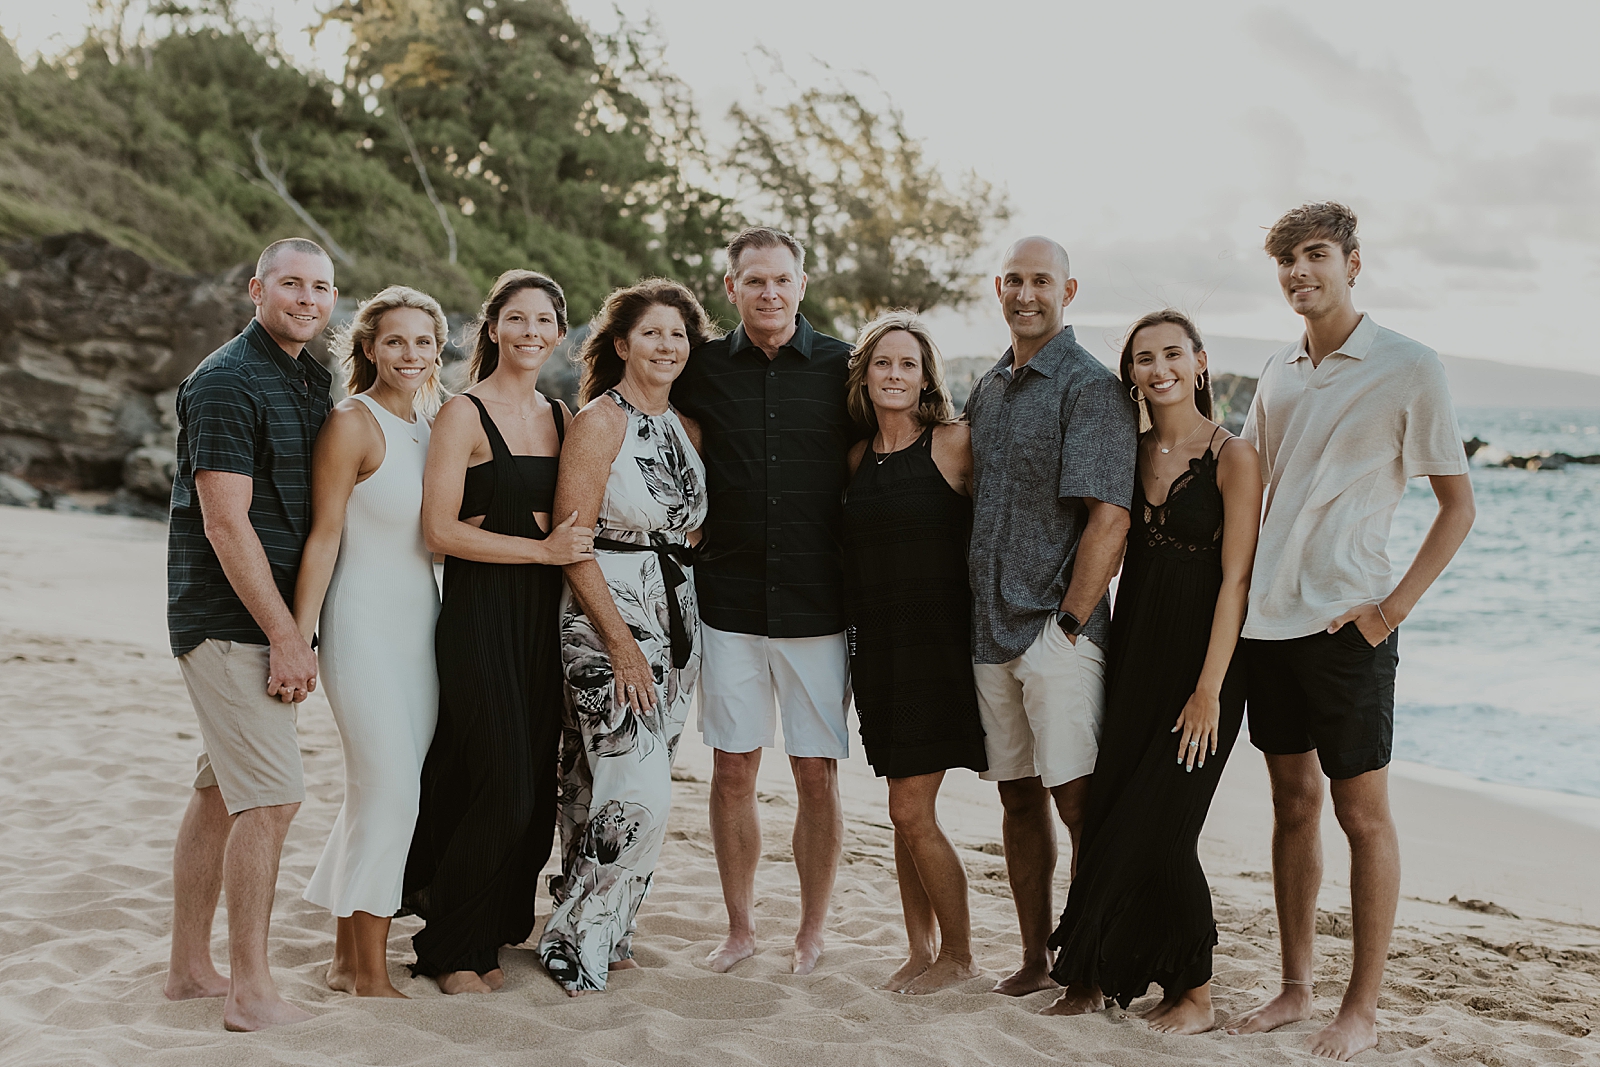 Full family portrait with everyone arm around each other standing on the beach